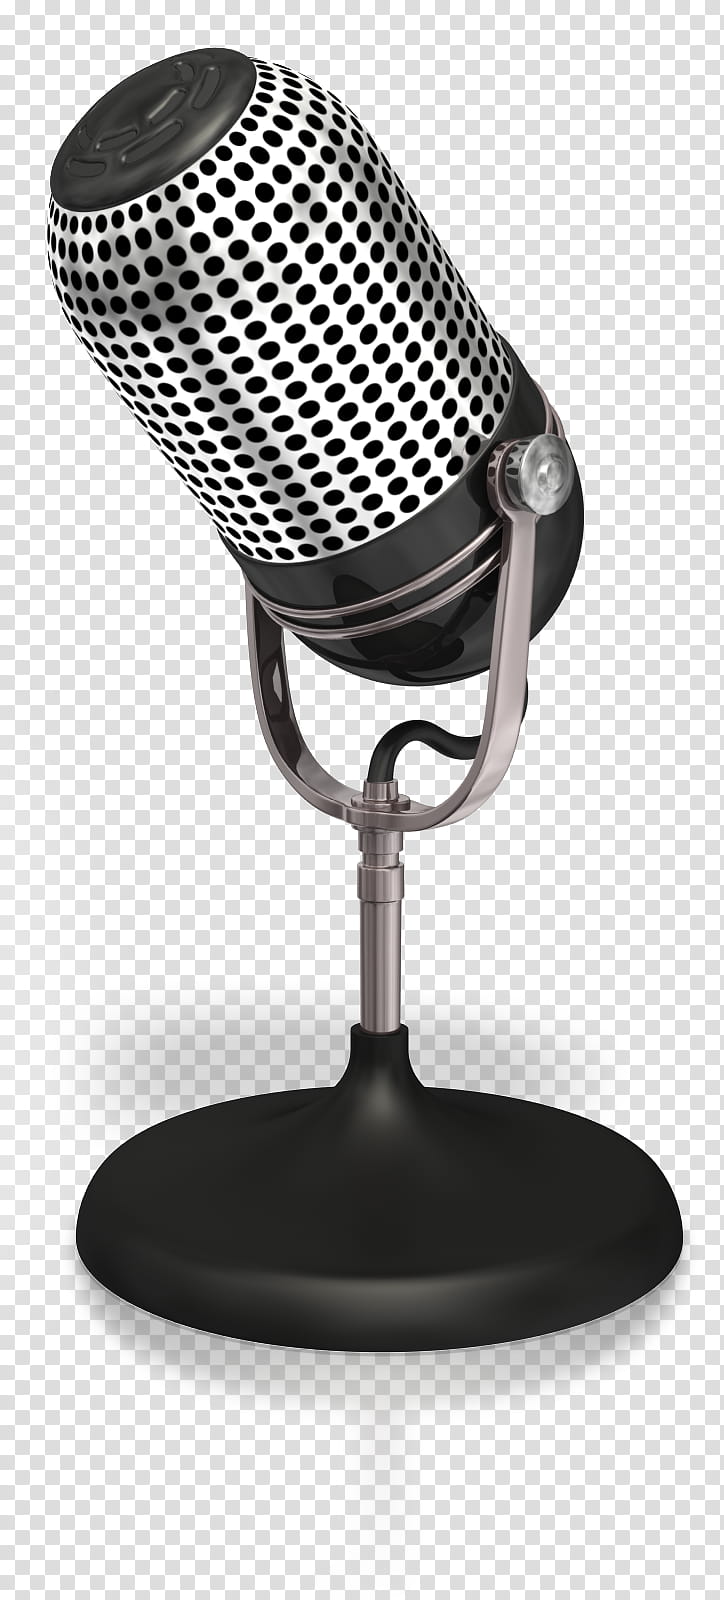 Cartoon Microphone, Sound, Wireless Microphone, Television, Broadcasting, Radio, Worksheet, Teacher transparent background PNG clipart